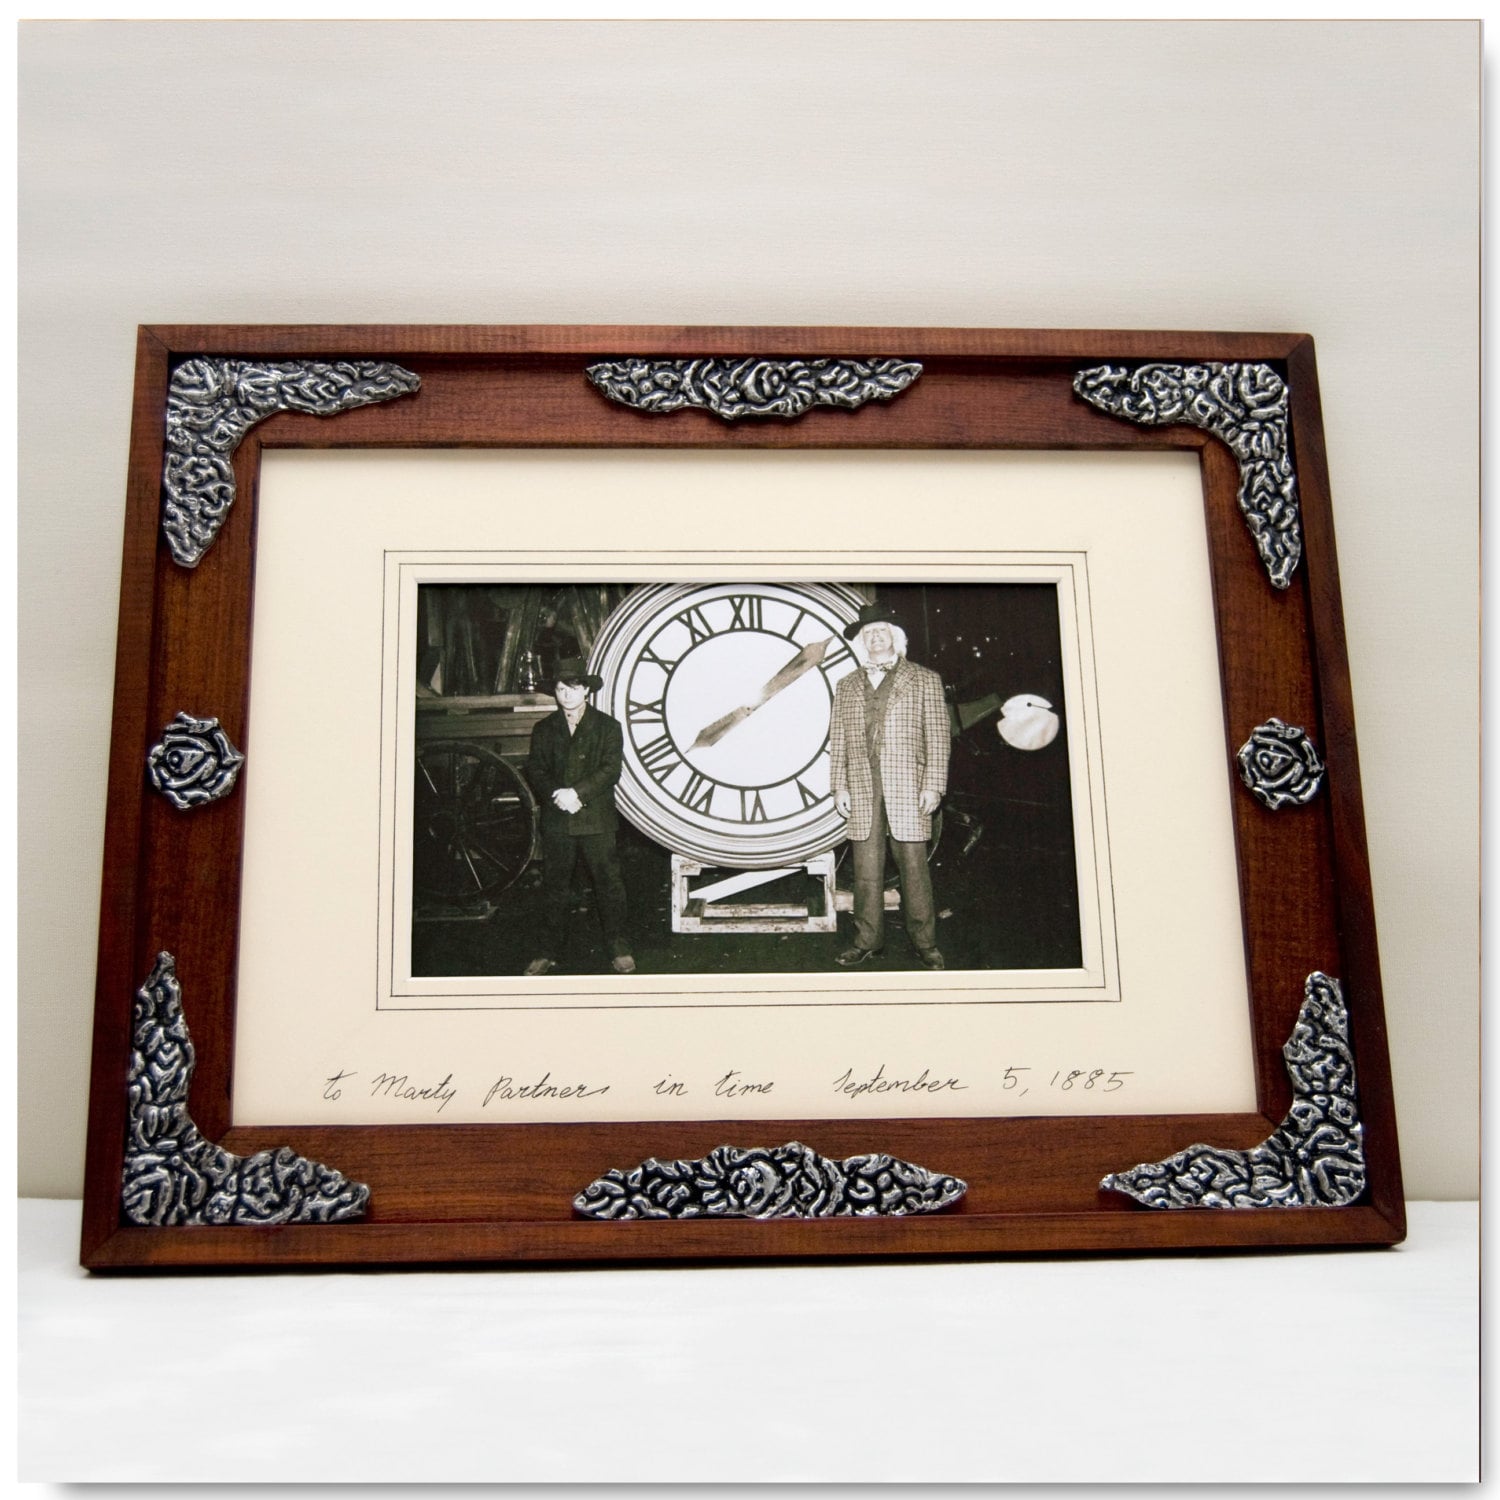 Back to the future III frame by MJ2Artesanos on Etsy